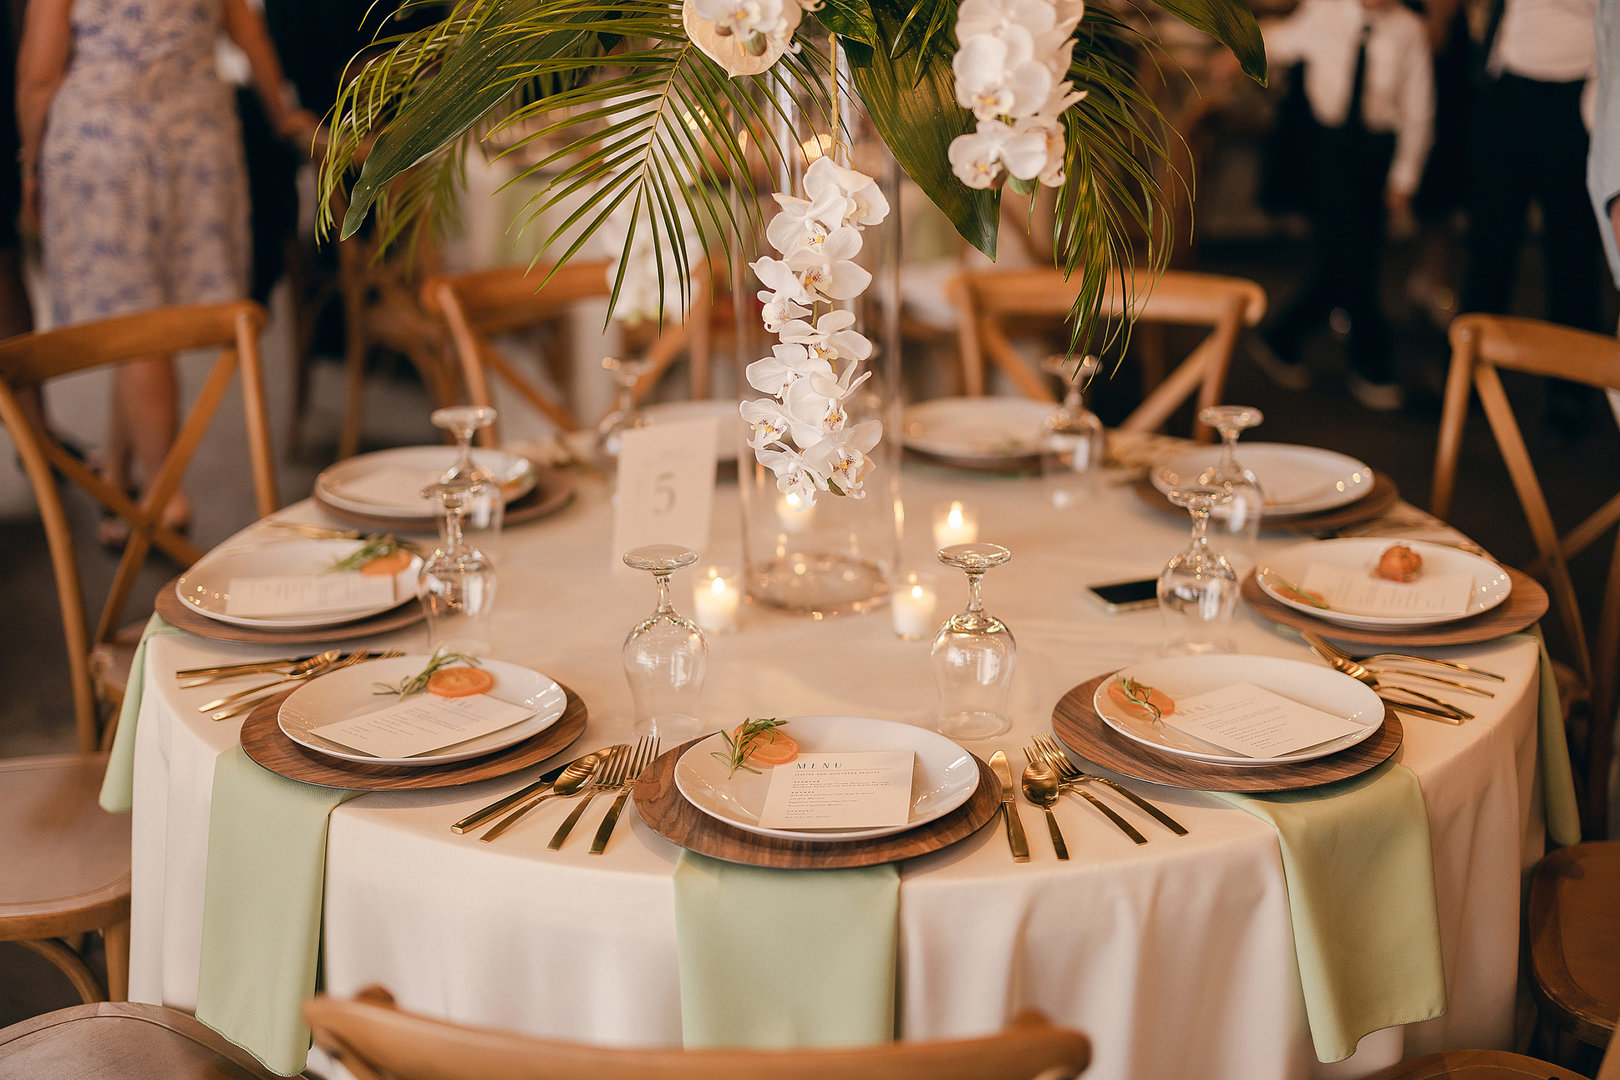 Wedding Reception at Hamp Williams gold and orange wedding details with orchids